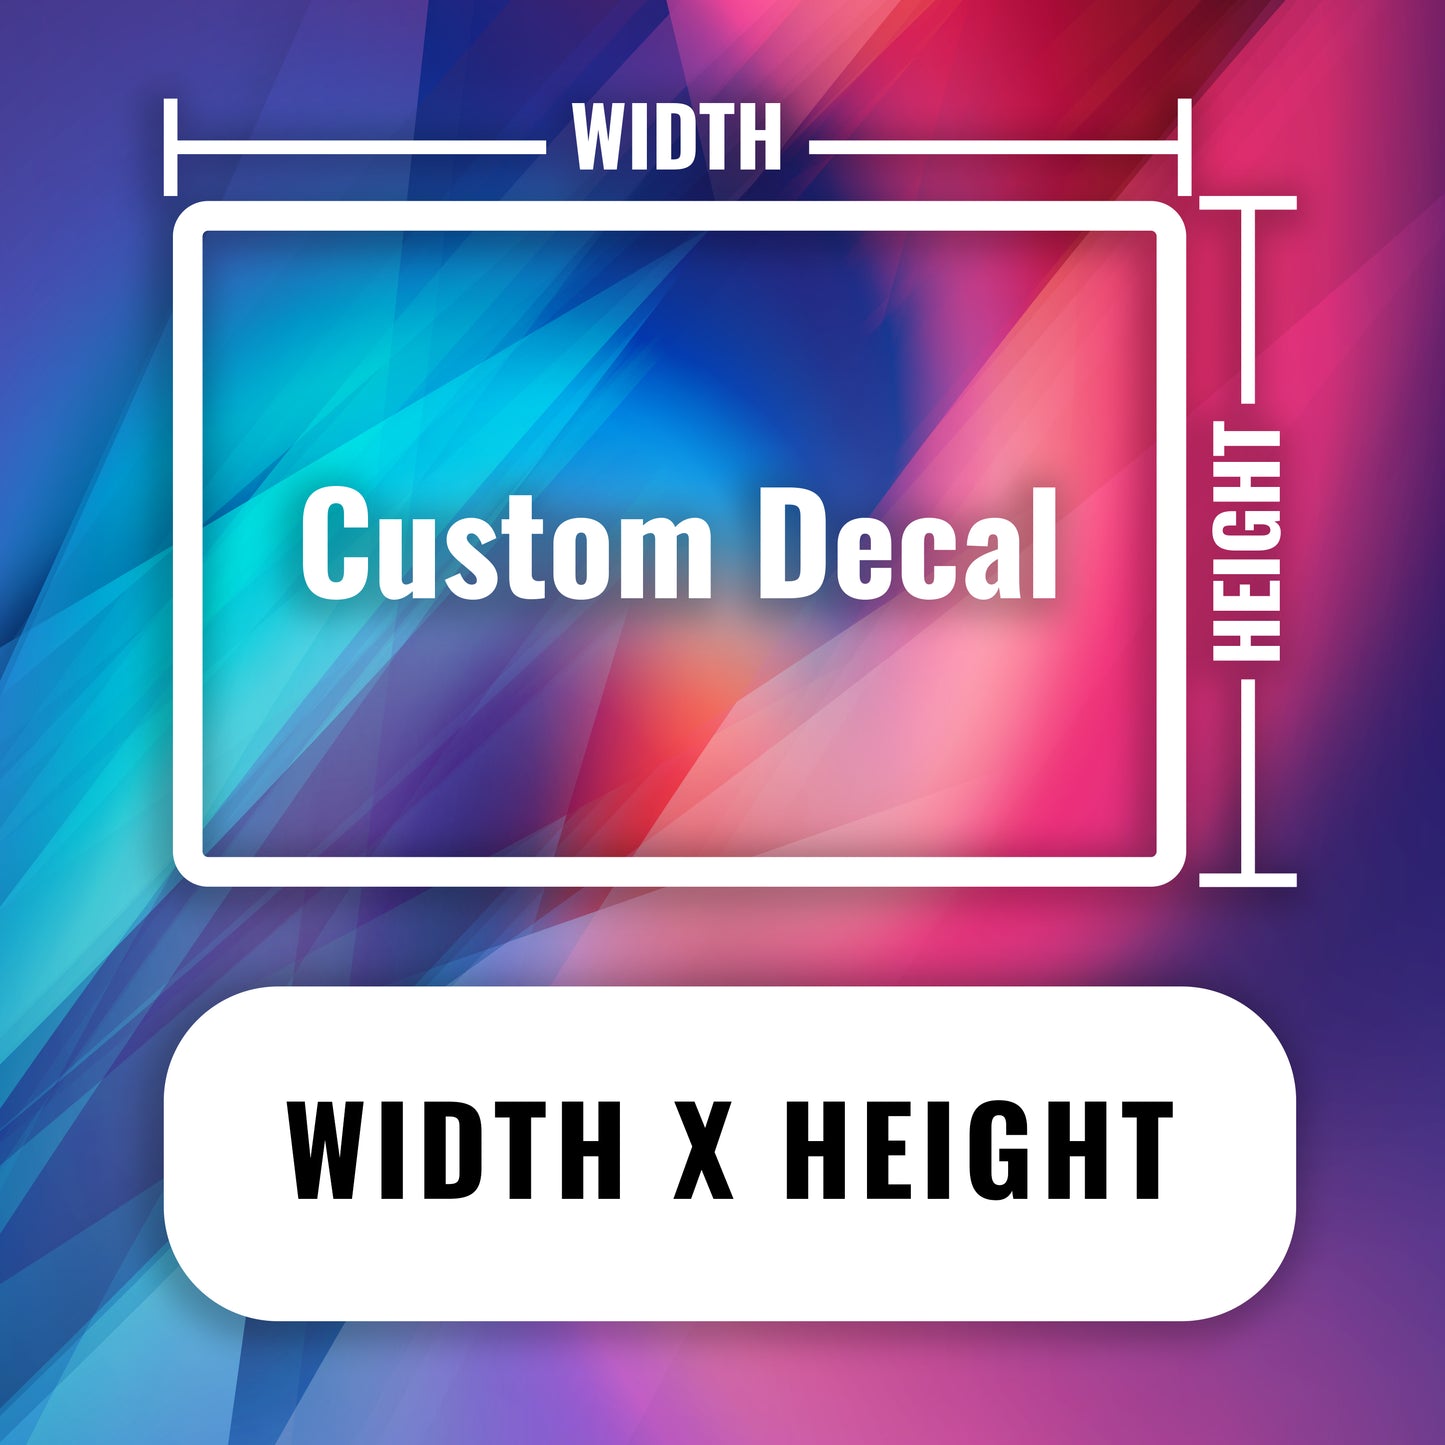 Decide your width and height.